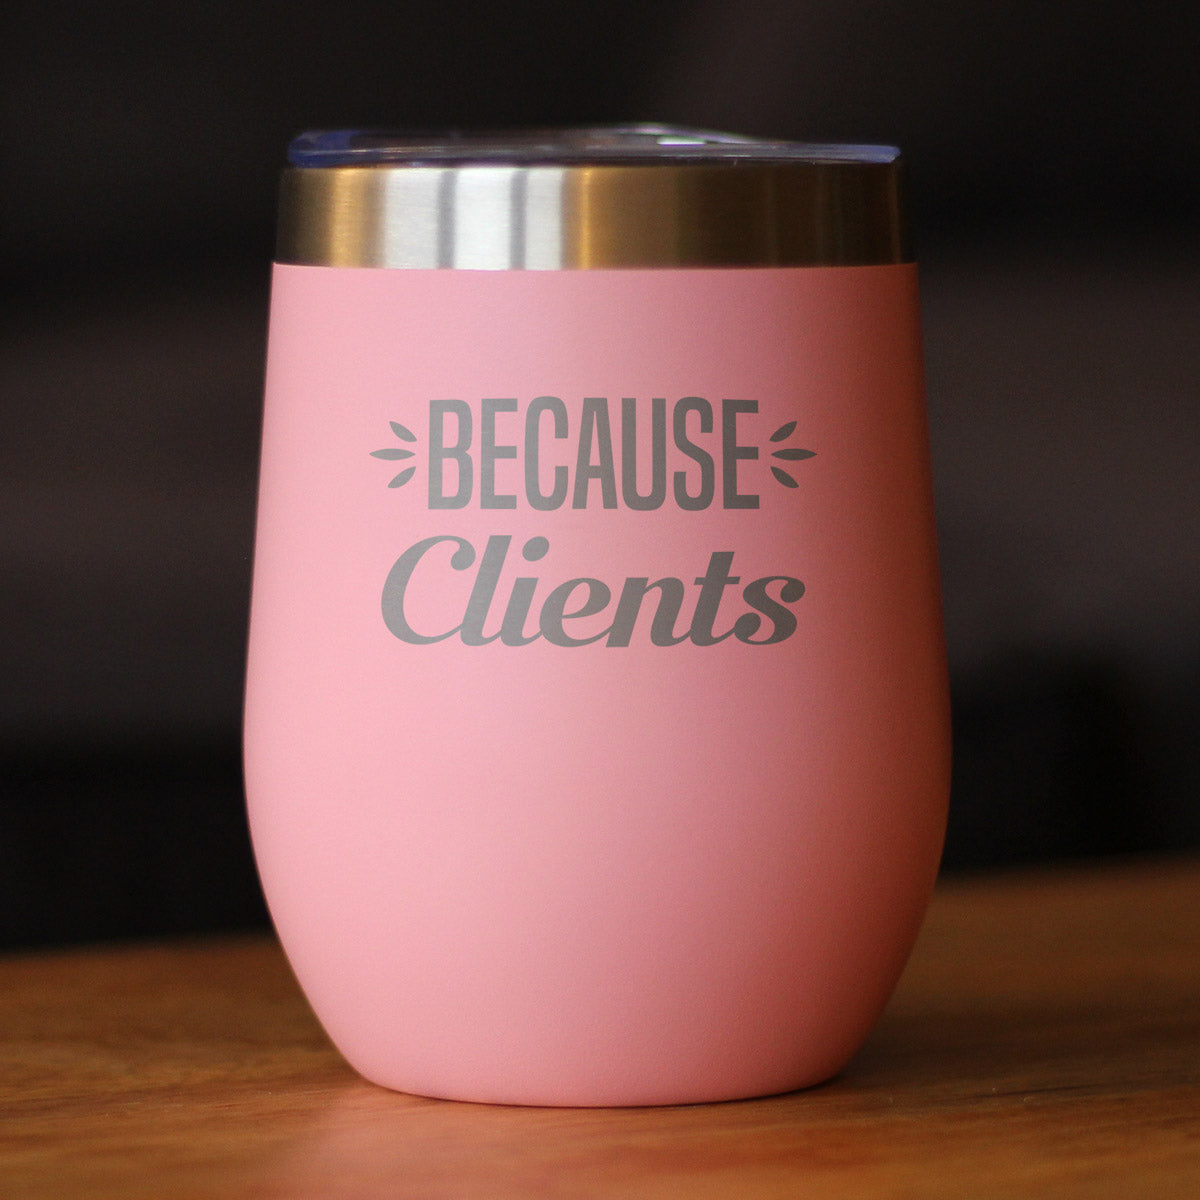 Because Clients - Wine Tumbler Glass with Sliding Lid - Stainless Steel Insulated Mug - Unique Professional Gifts for Coworkers